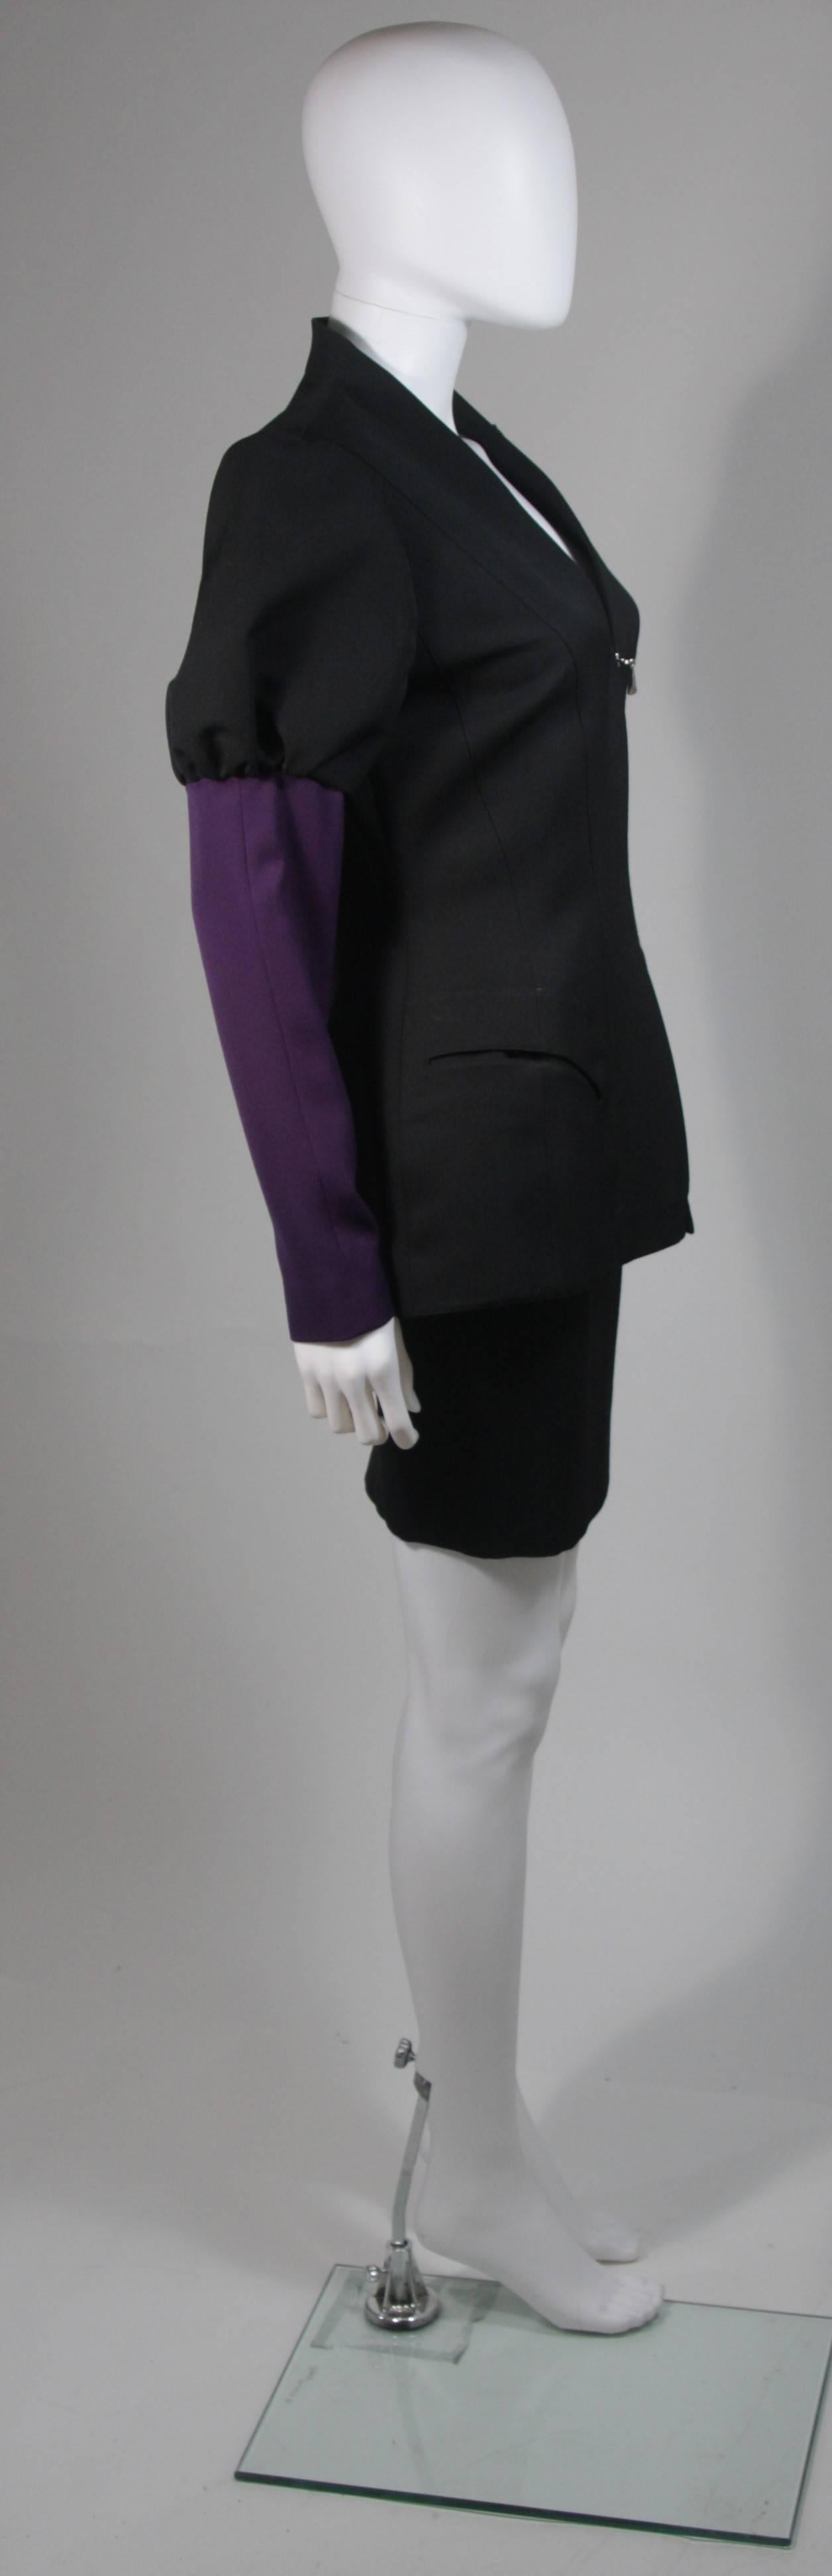 Women's Thierry Mugler Black and Purple Skirt Suit Size Small